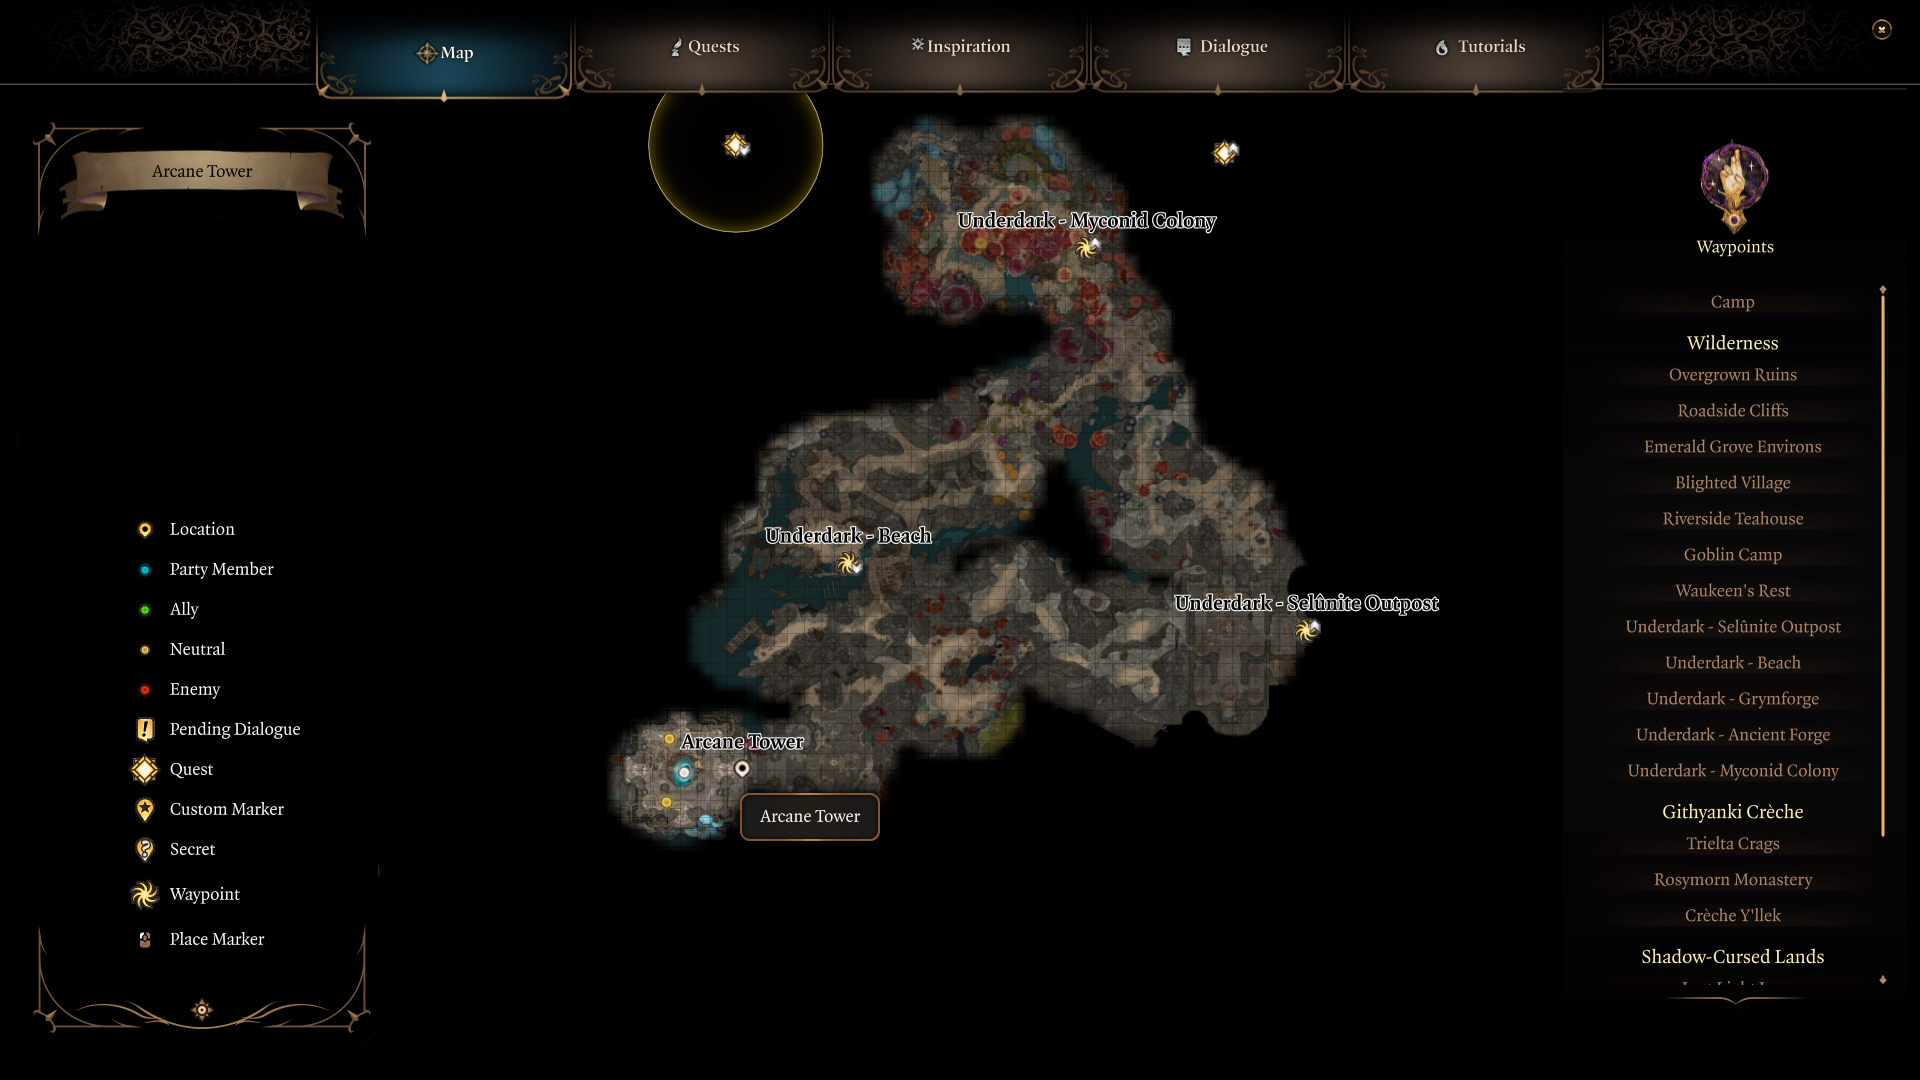 Image of the map in BG3 showing the Arcane Tower.